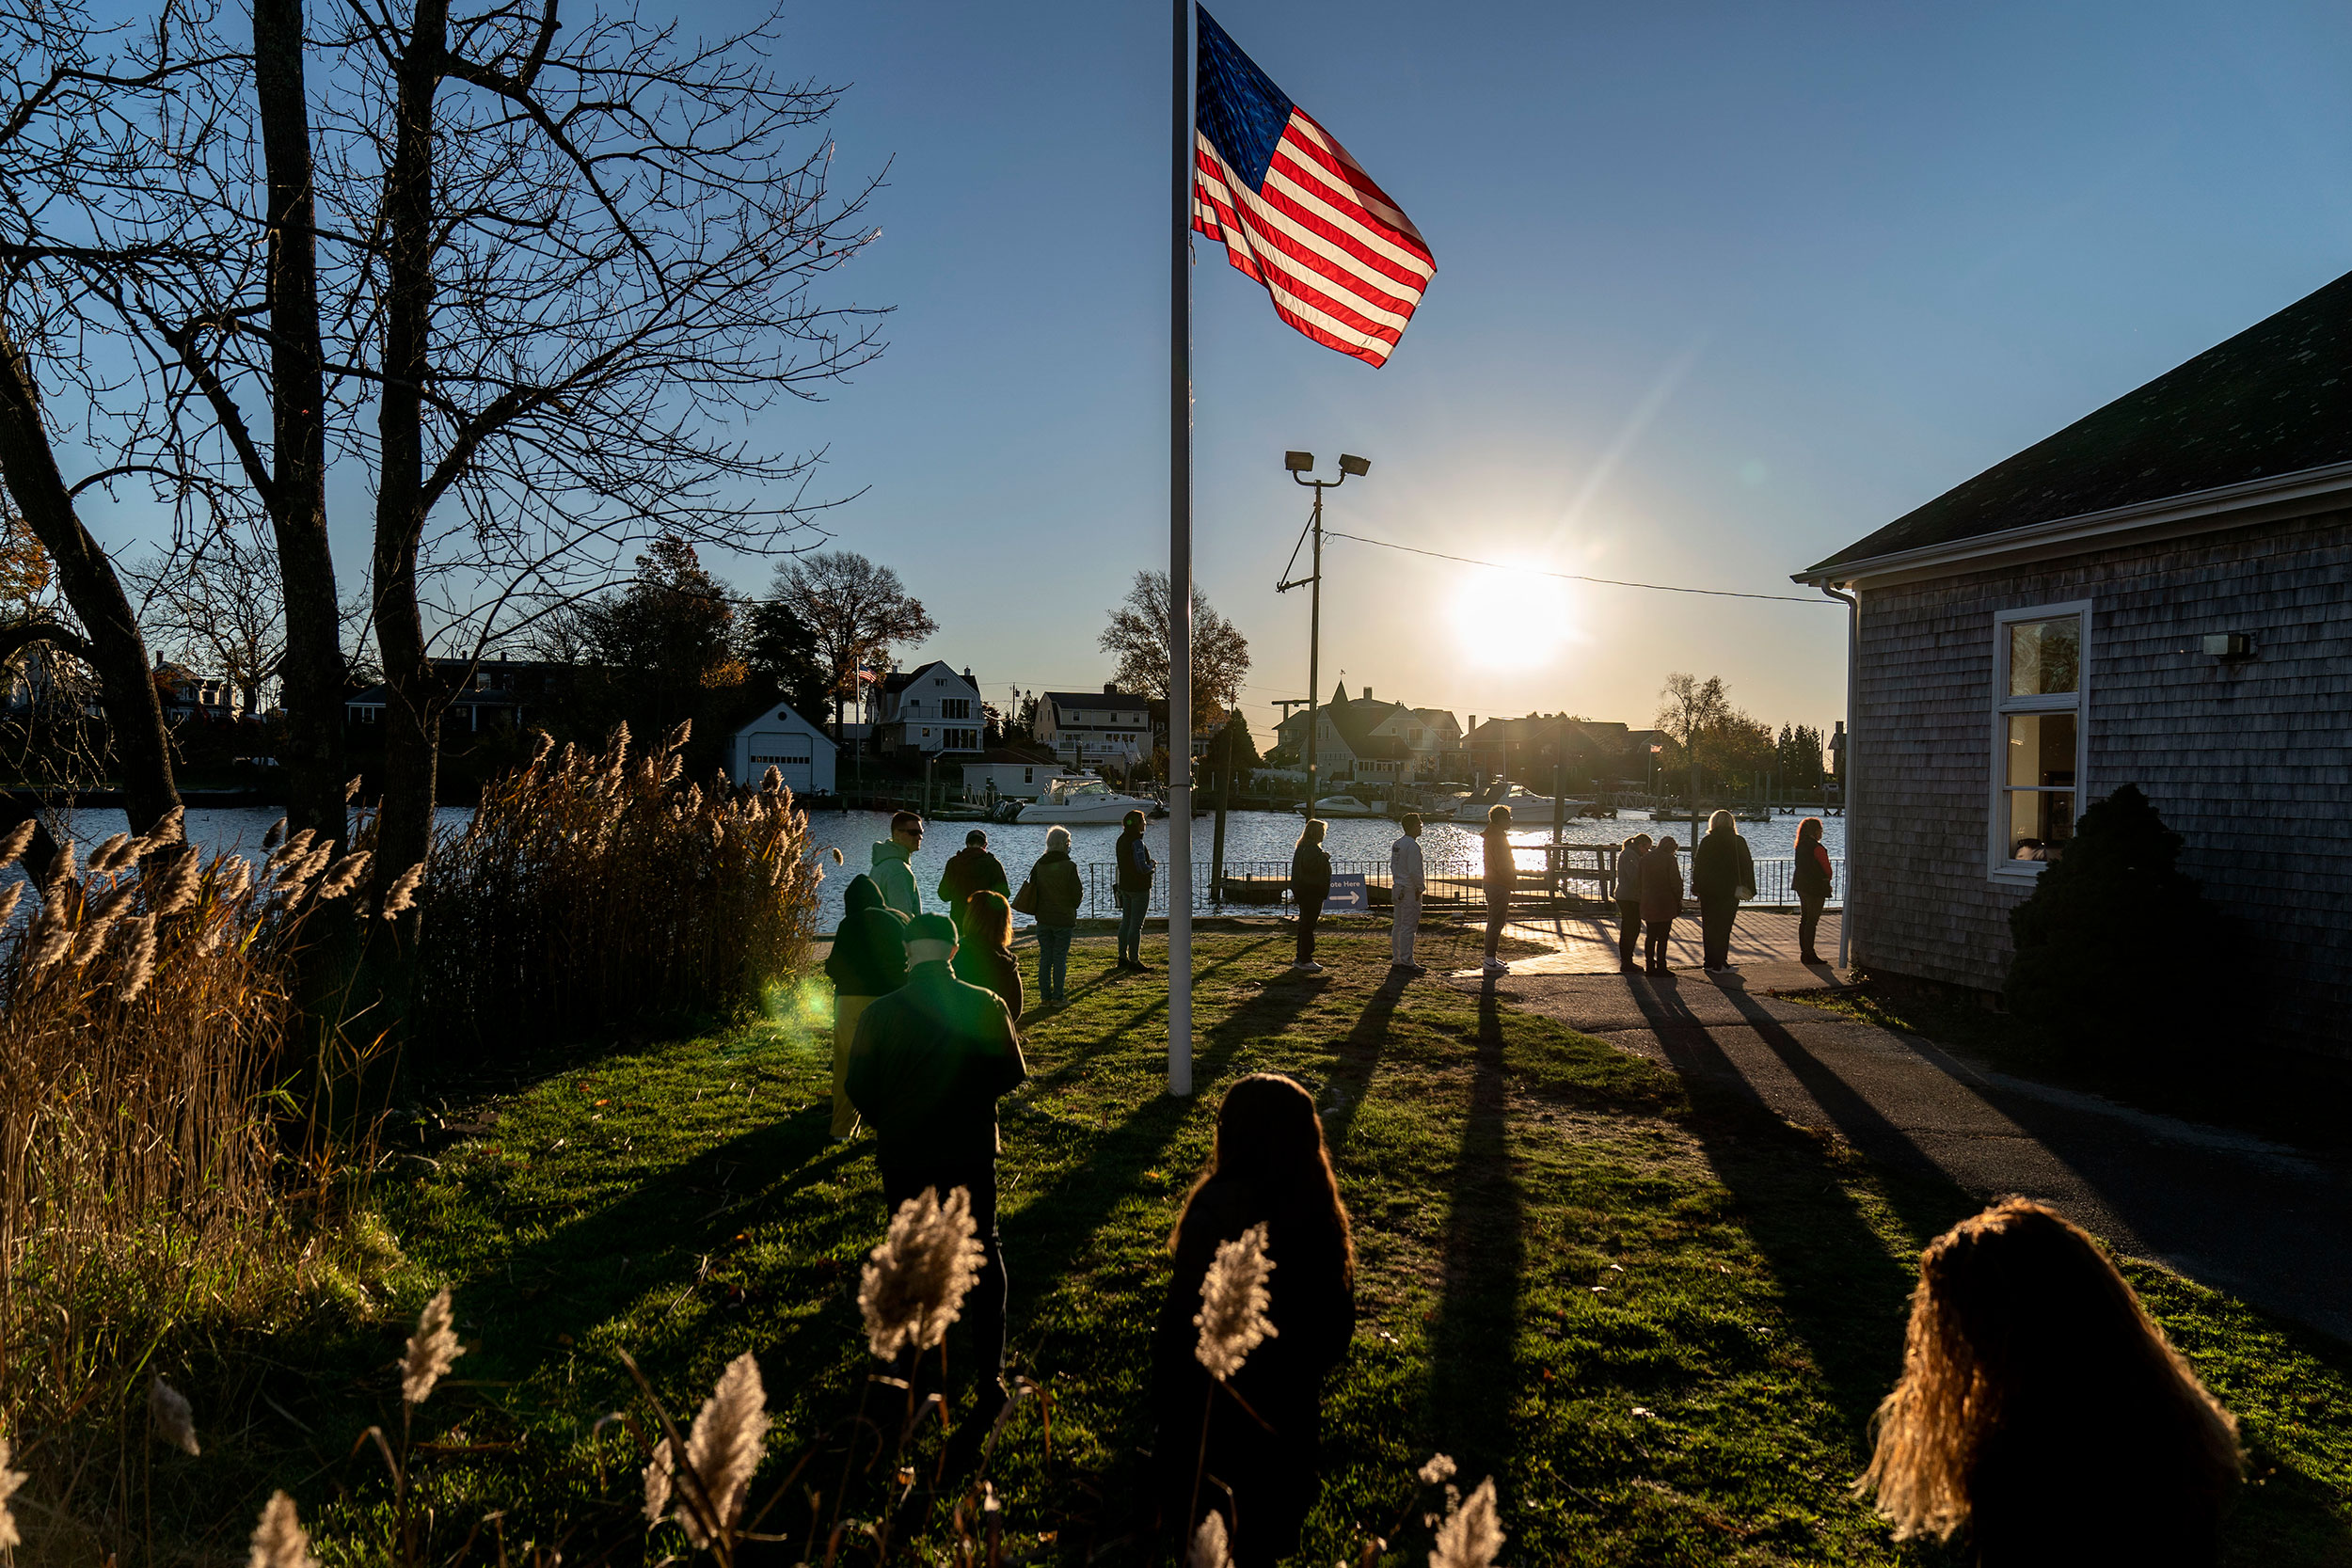 Voters line up to cast their ballots at the Aspray Boat House in Warwick, Rhode Island, Tuesday.